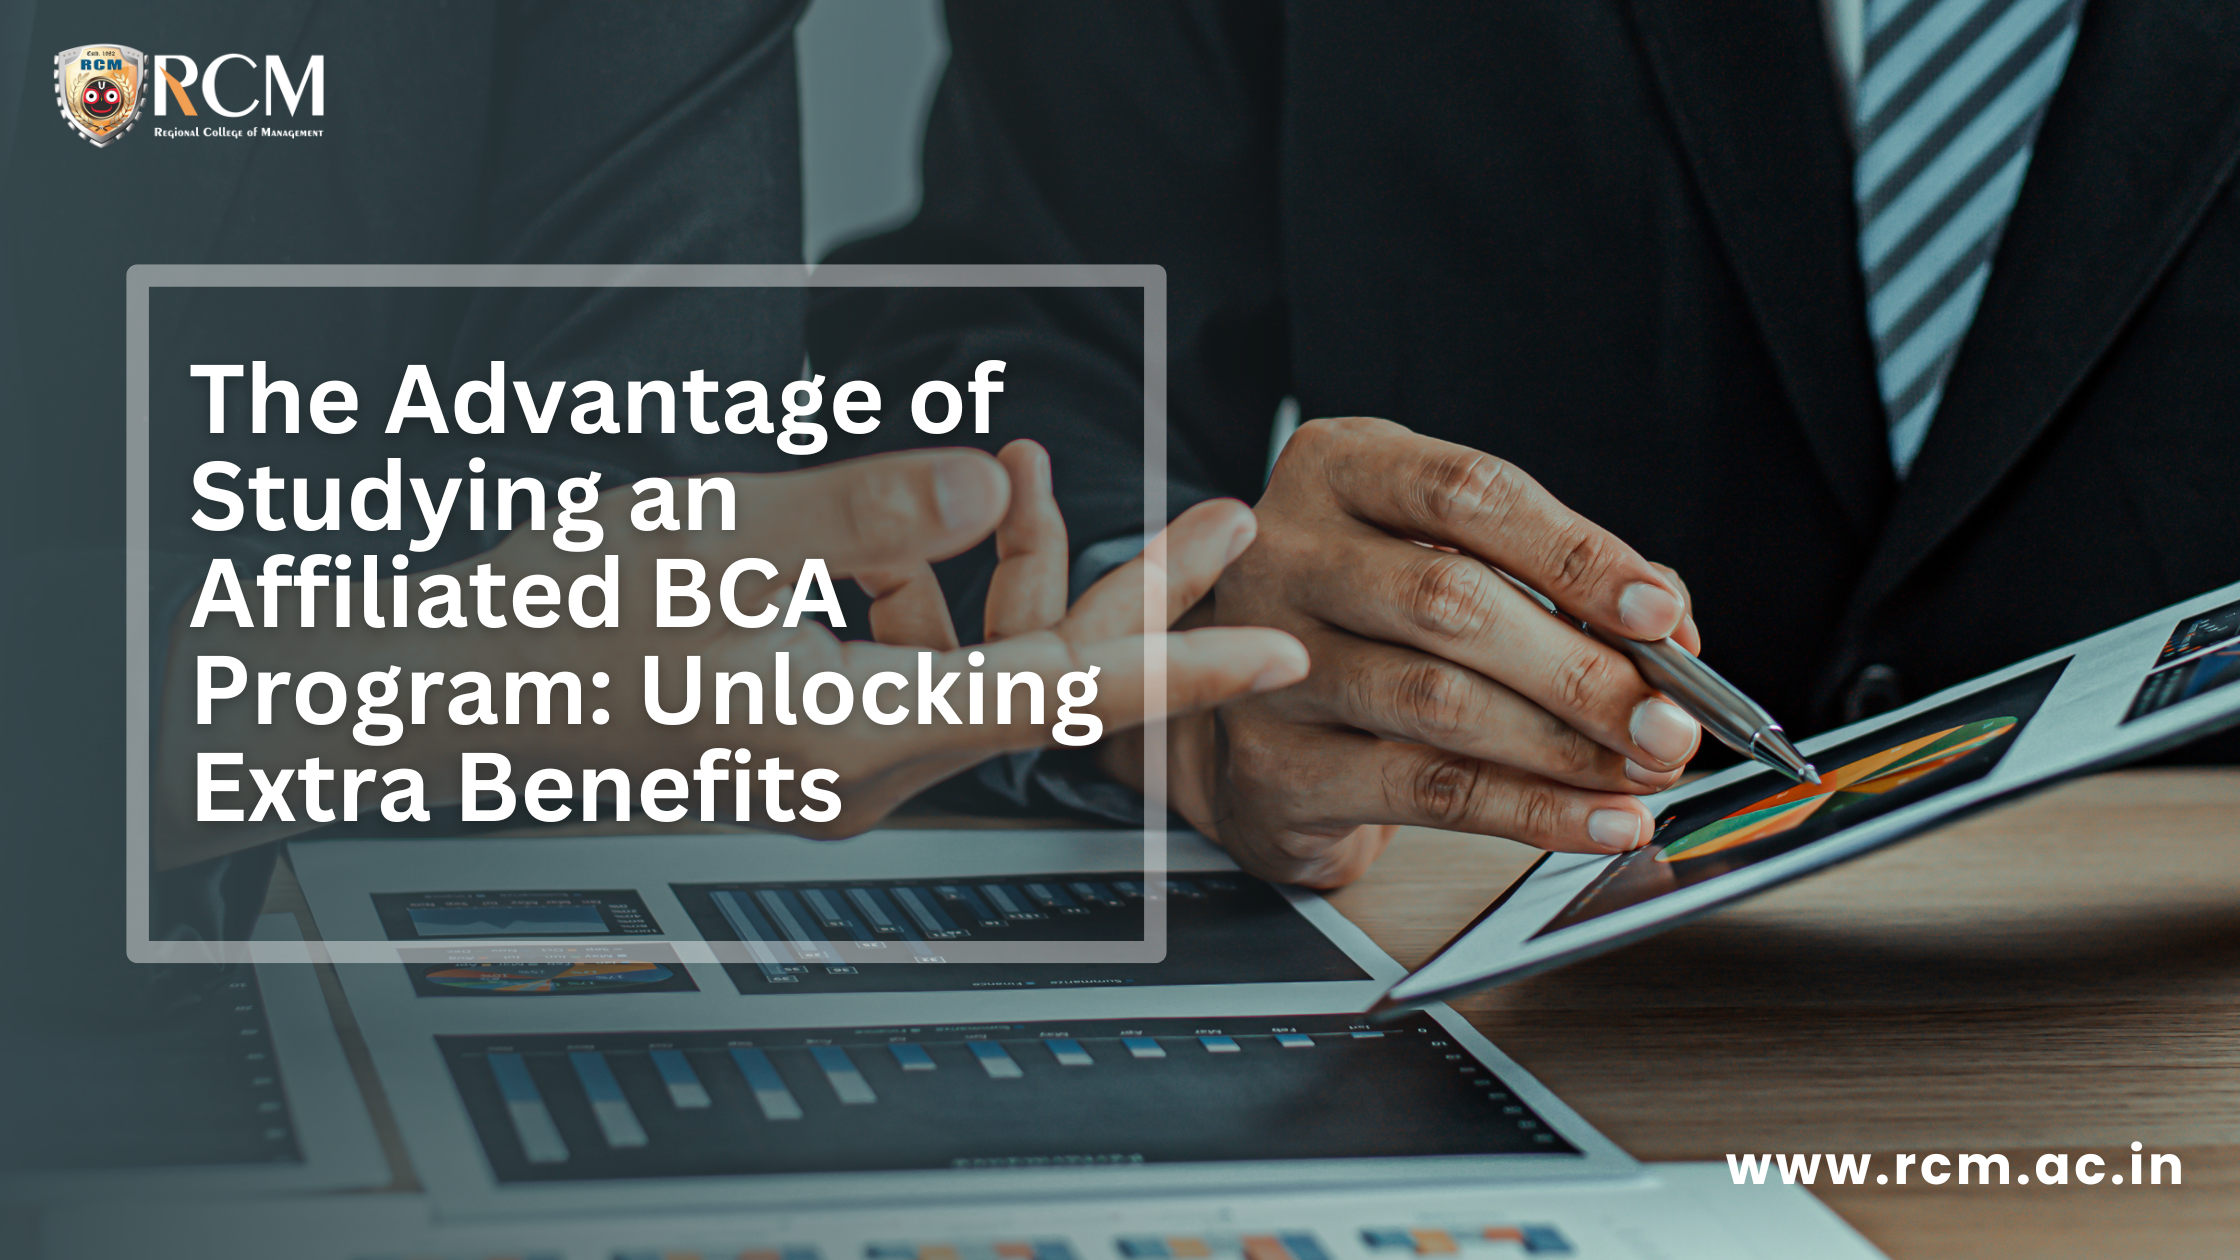 You are currently viewing The Advantage of Studying an Affiliated BCA Program: Unlocking Extra Benefits